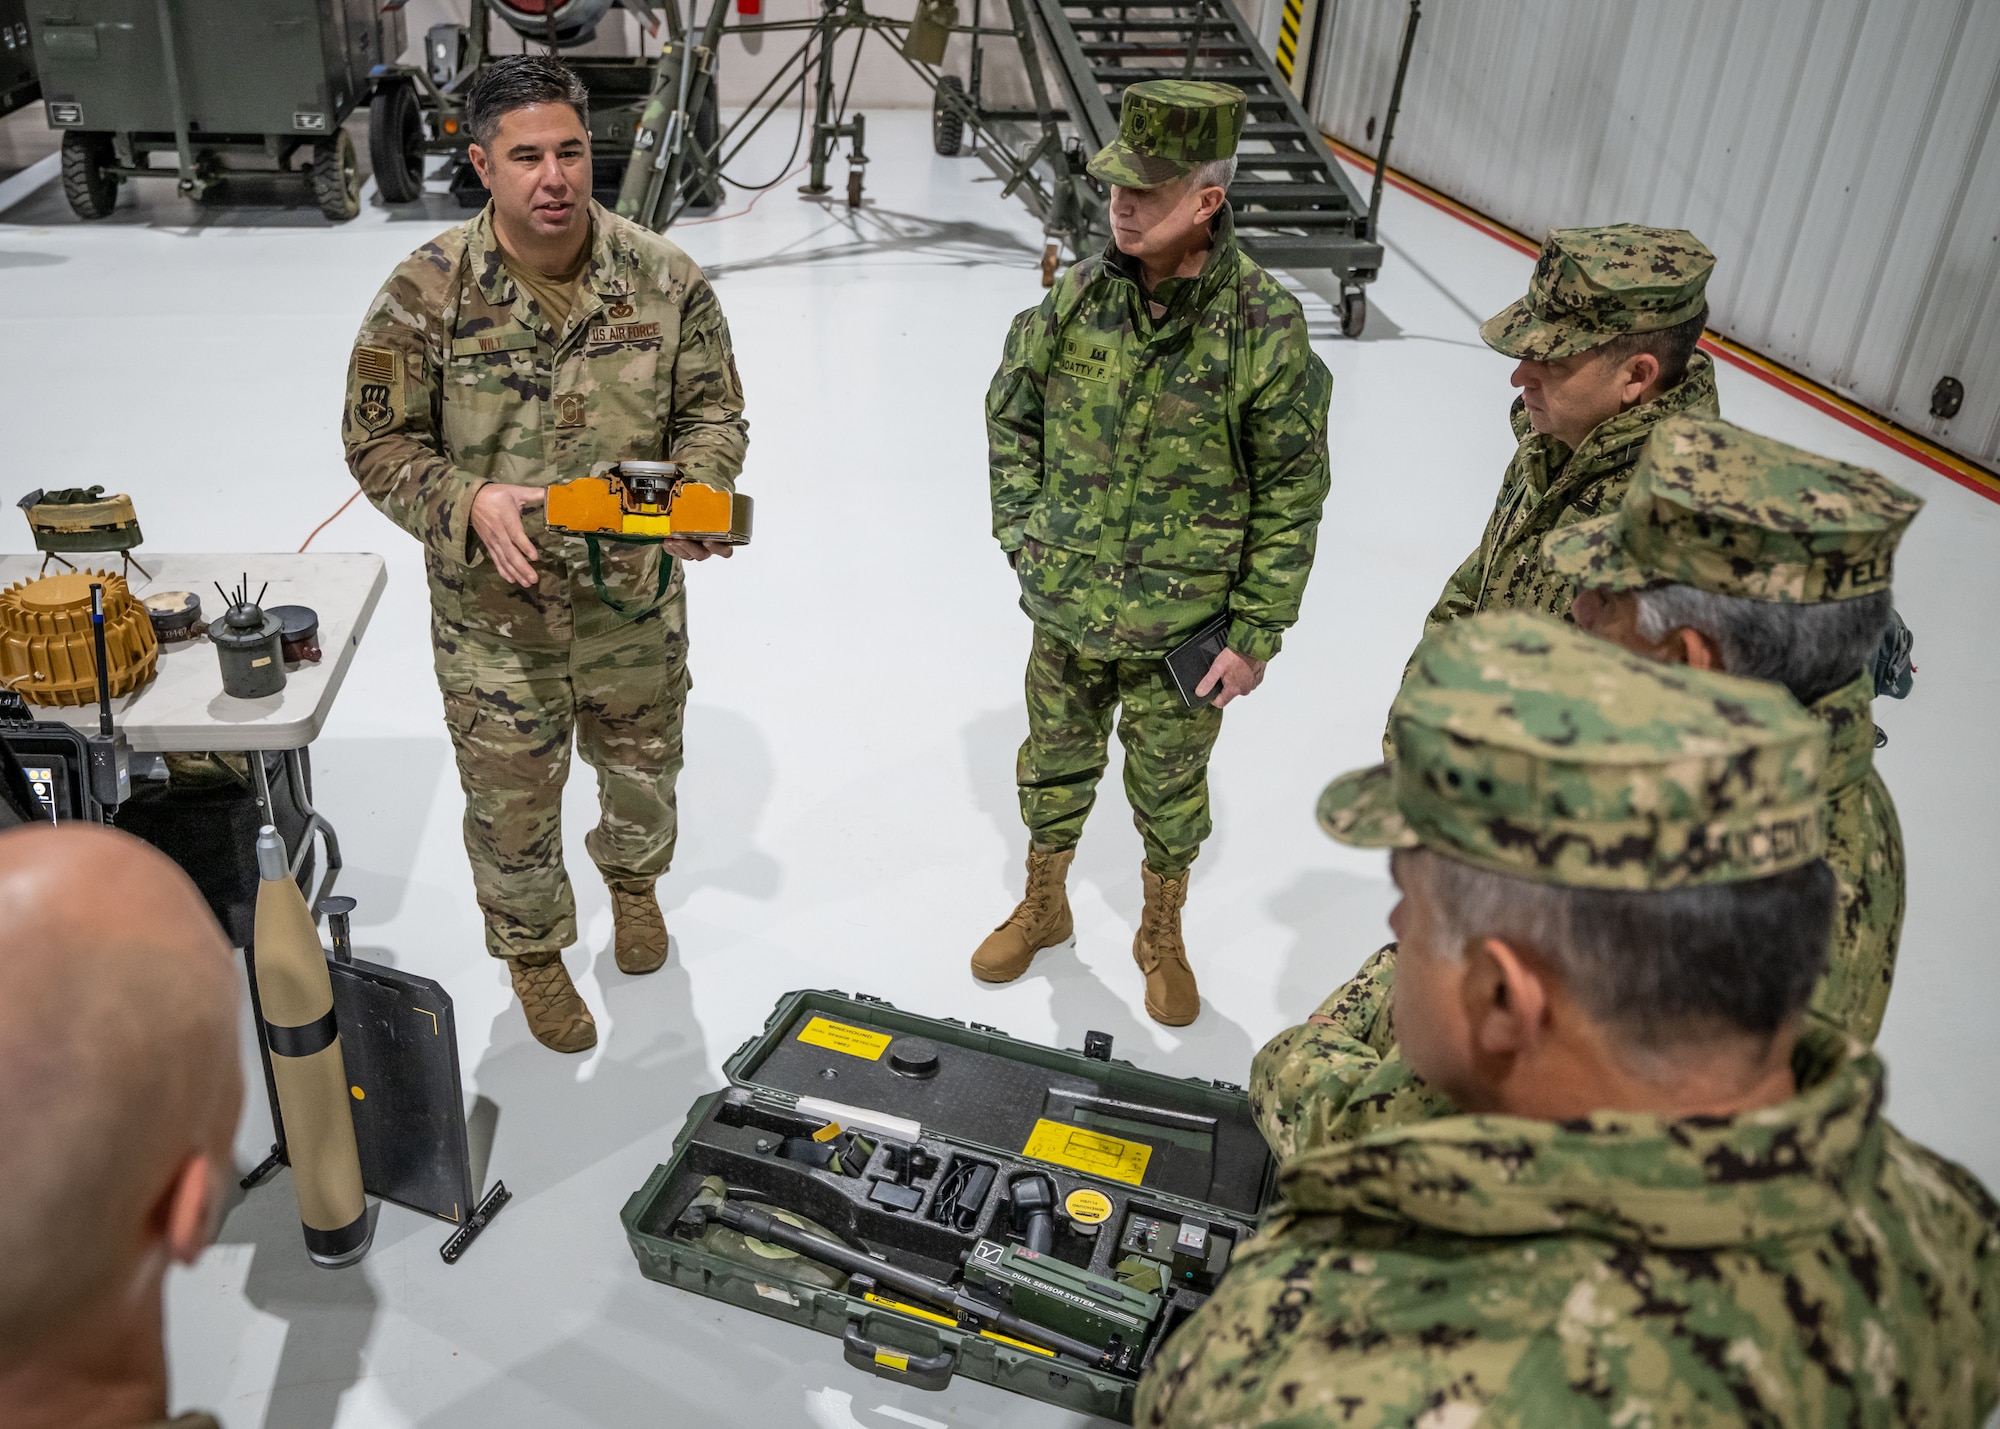 U.S. Air Force Chief Master Sgt. Matthew Wilt, left, superintendent of the Kentucky Air National Guard’s 123rd Explosive Ordnance Disposal Flight, discusses mine detection equipment with Ecuadorian military leaders at the Kentucky Air National Guard Base in Louisville, Ky., Jan. 31, 2024. The Ecuadorians are visiting this week to exchange information with the Kentucky National Guard as part of the State Partnership Program, a National Guard Bureau effort that pairs Guard units with foreign allies to foster enhanced understanding across all aspects of civil and military affairs. (U.S. Air National Guard photo by Dale Greer)